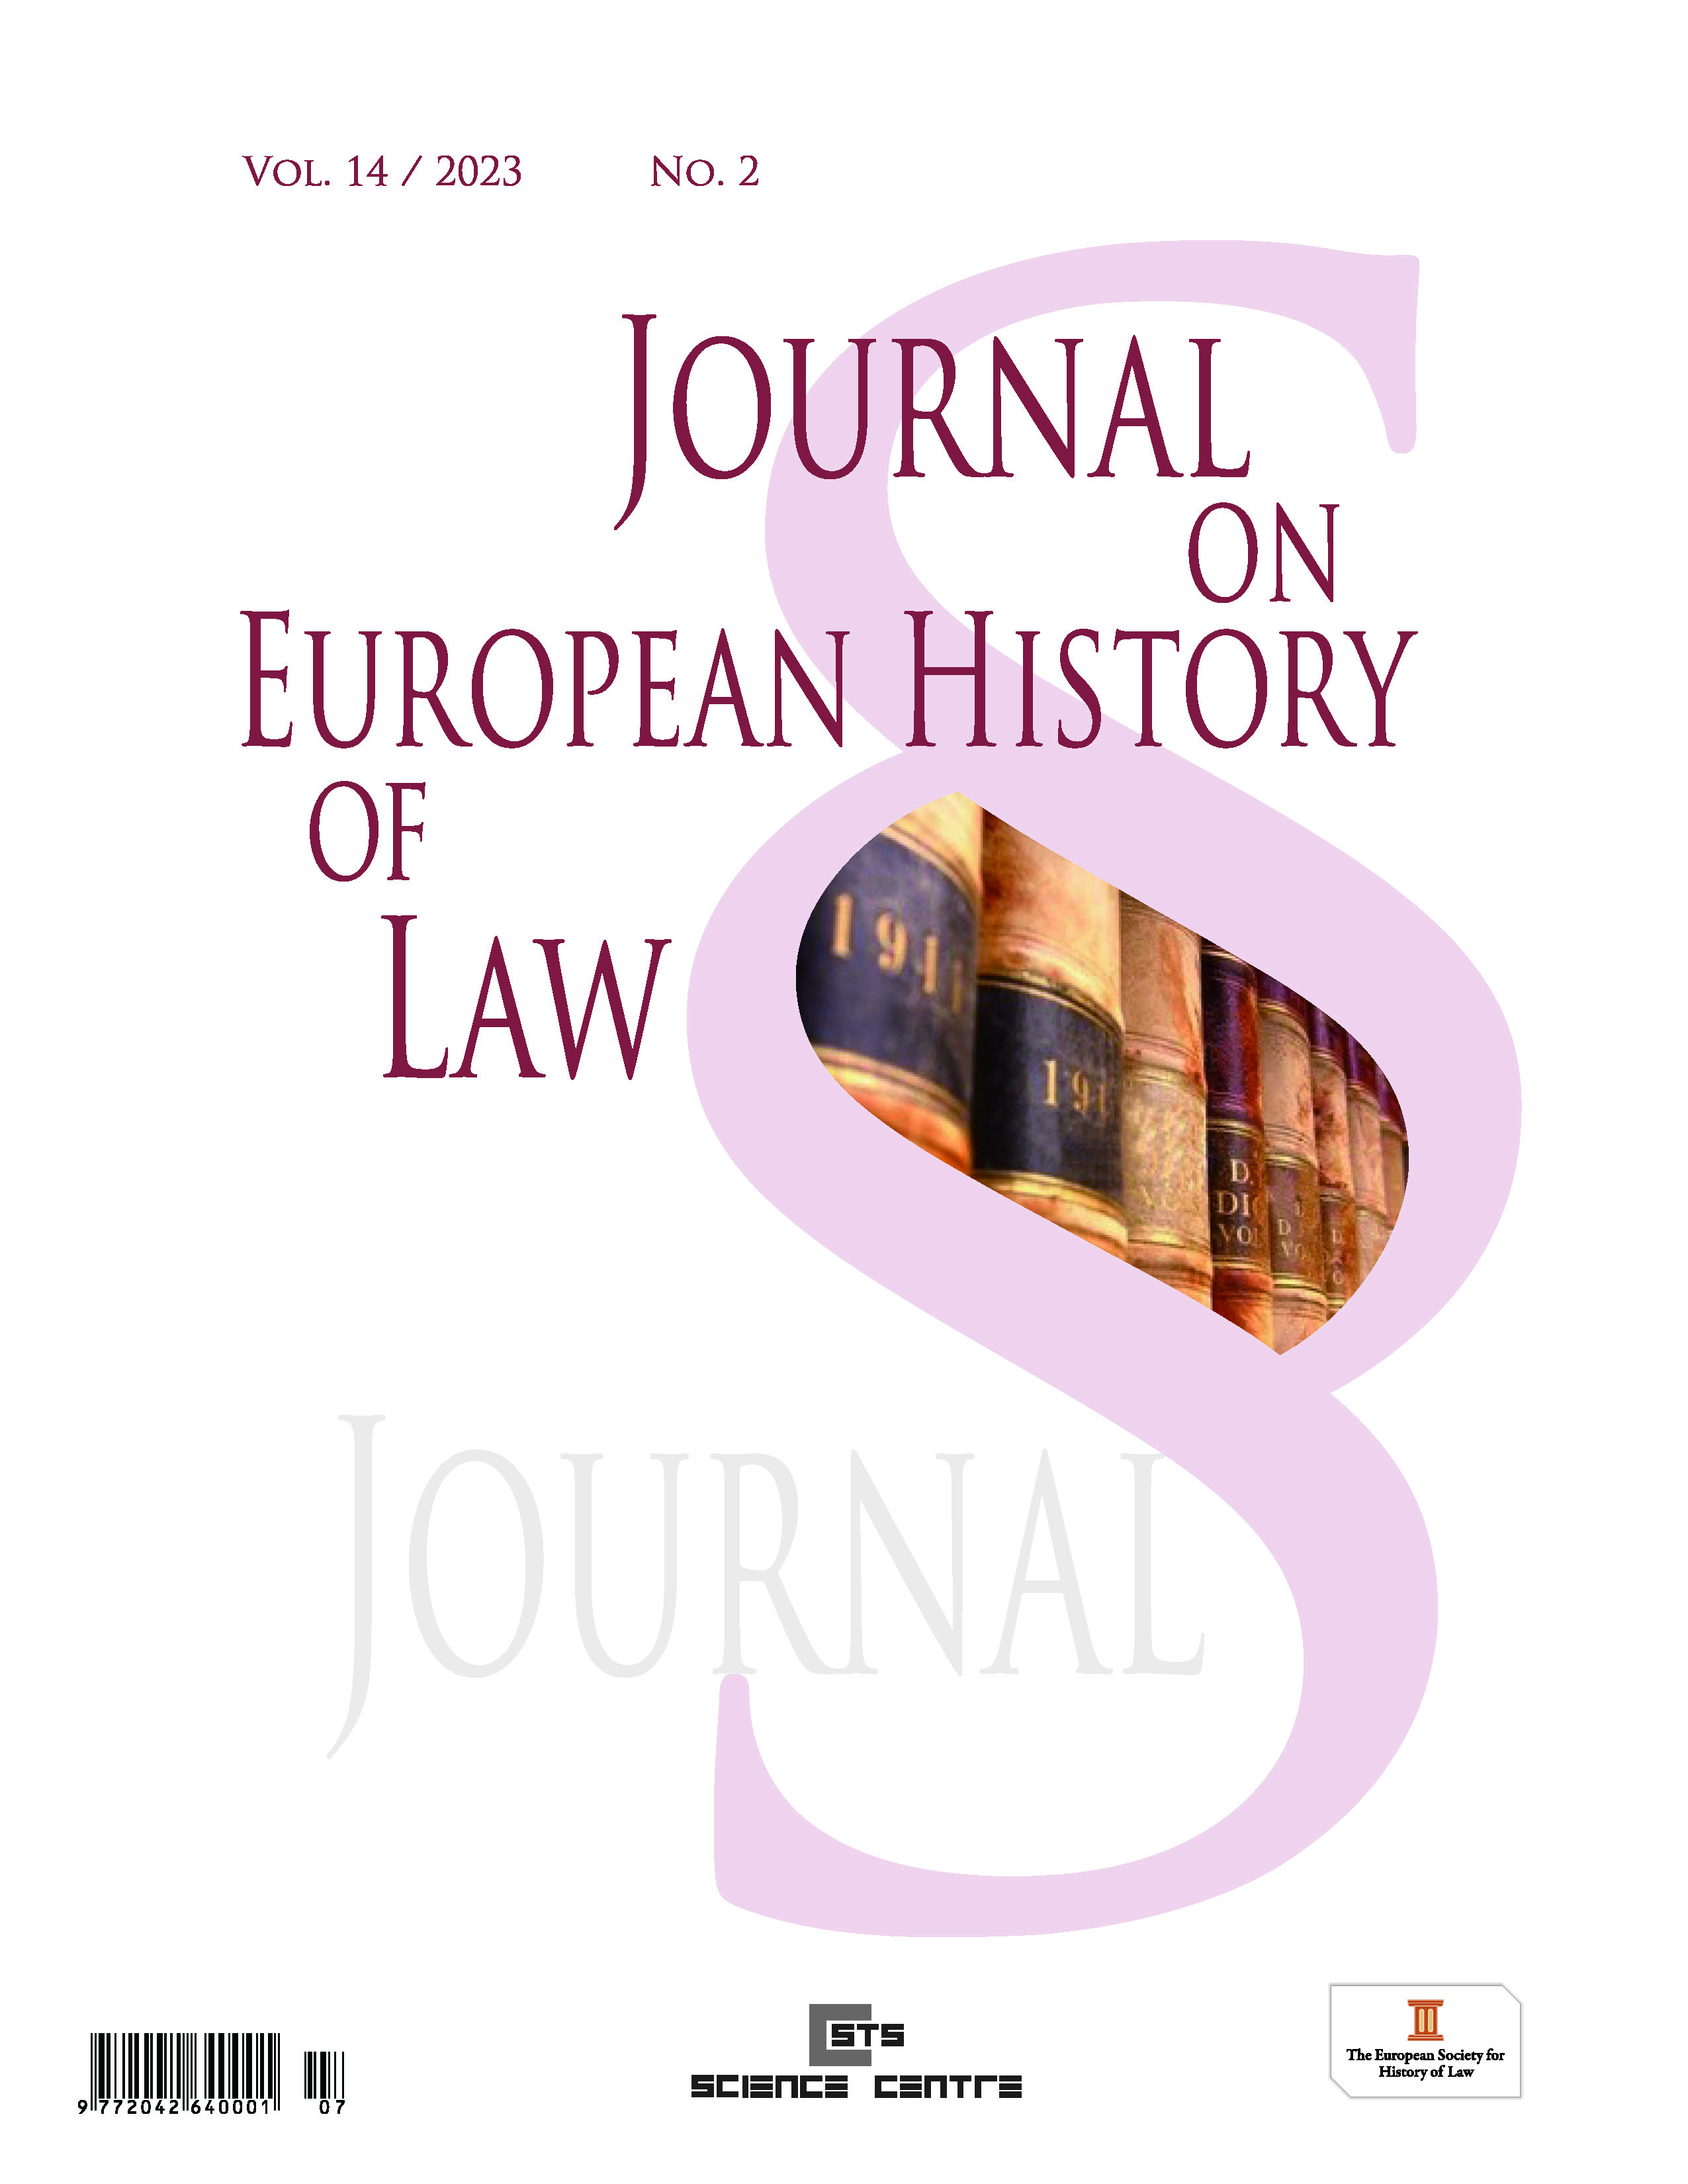 Jews and Anti-Jewish Rules in the Czech Codification of Church Law of 1349